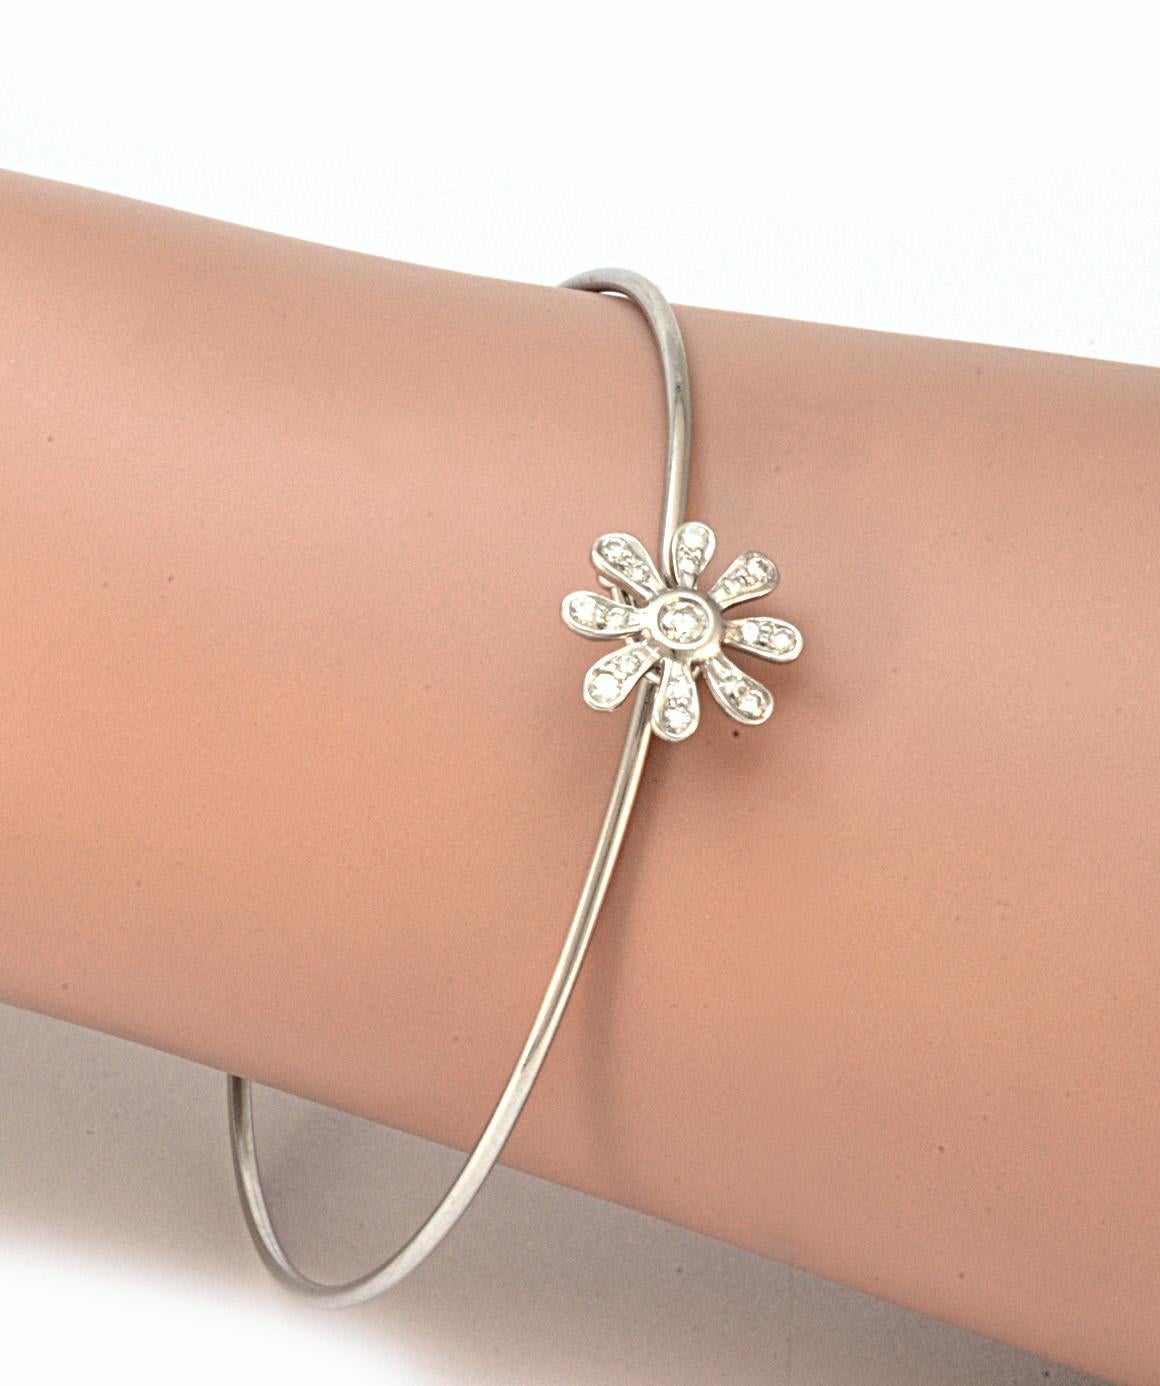 100% Authentic Tiffany & Co Paloma Picasso Platinum Diamond Daisy Bangle in excellent condition! This platinum bangle measures approximately 2.5 in X 2.5 in. It features a daisy measuring approximately  13.66mm X 13.58mm. The daisy has 17 diamonds F